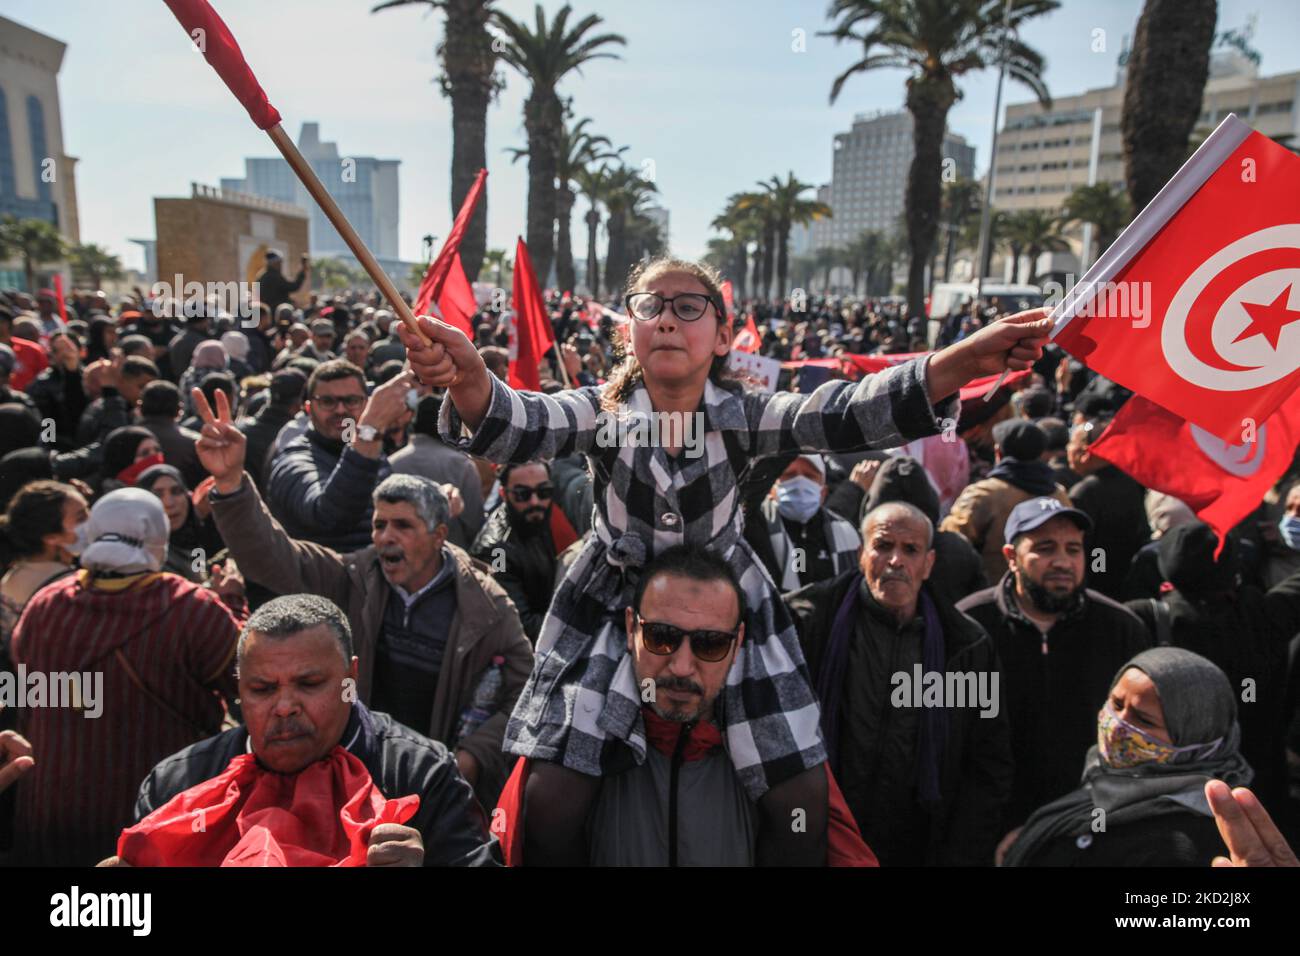 A young girl on a demonstrator’s shoulders, shouts slogans as she waves Tunisian flags during a demonstration held at the initiative of “Citizens Against the Coup - the Democratic Initiative” campaign, on Mohamed 5 avenue in the capital Tunis, Tunisia, on February 13, 2022, to protest against the dissolution of the country’s Supreme Judicial Council and called for the independence of the judiciary. Protesters also called for the release of the Vice President of Ennahda party, Noureddine Bhiri who is placed under house arrest since more than six weeks. Demonstrators also protested against what  Stock Photo